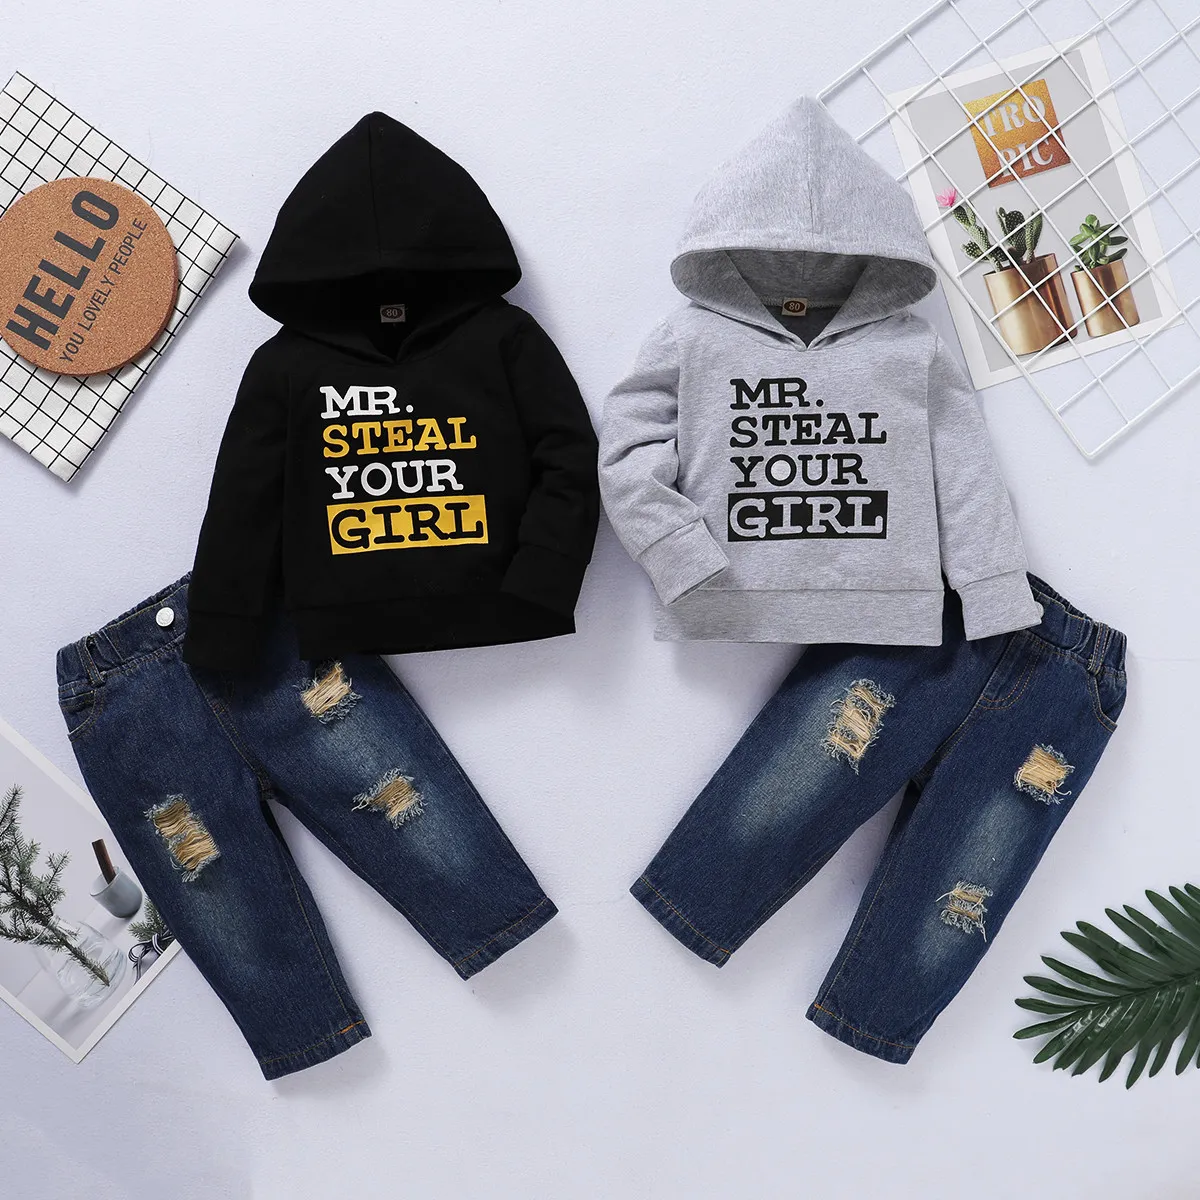 Micol Emilly Boys Clothing Set Winter Autumn Kids Bär Cool Baby Costume Boys Outfit Suit 15 år gammal Y11126392307